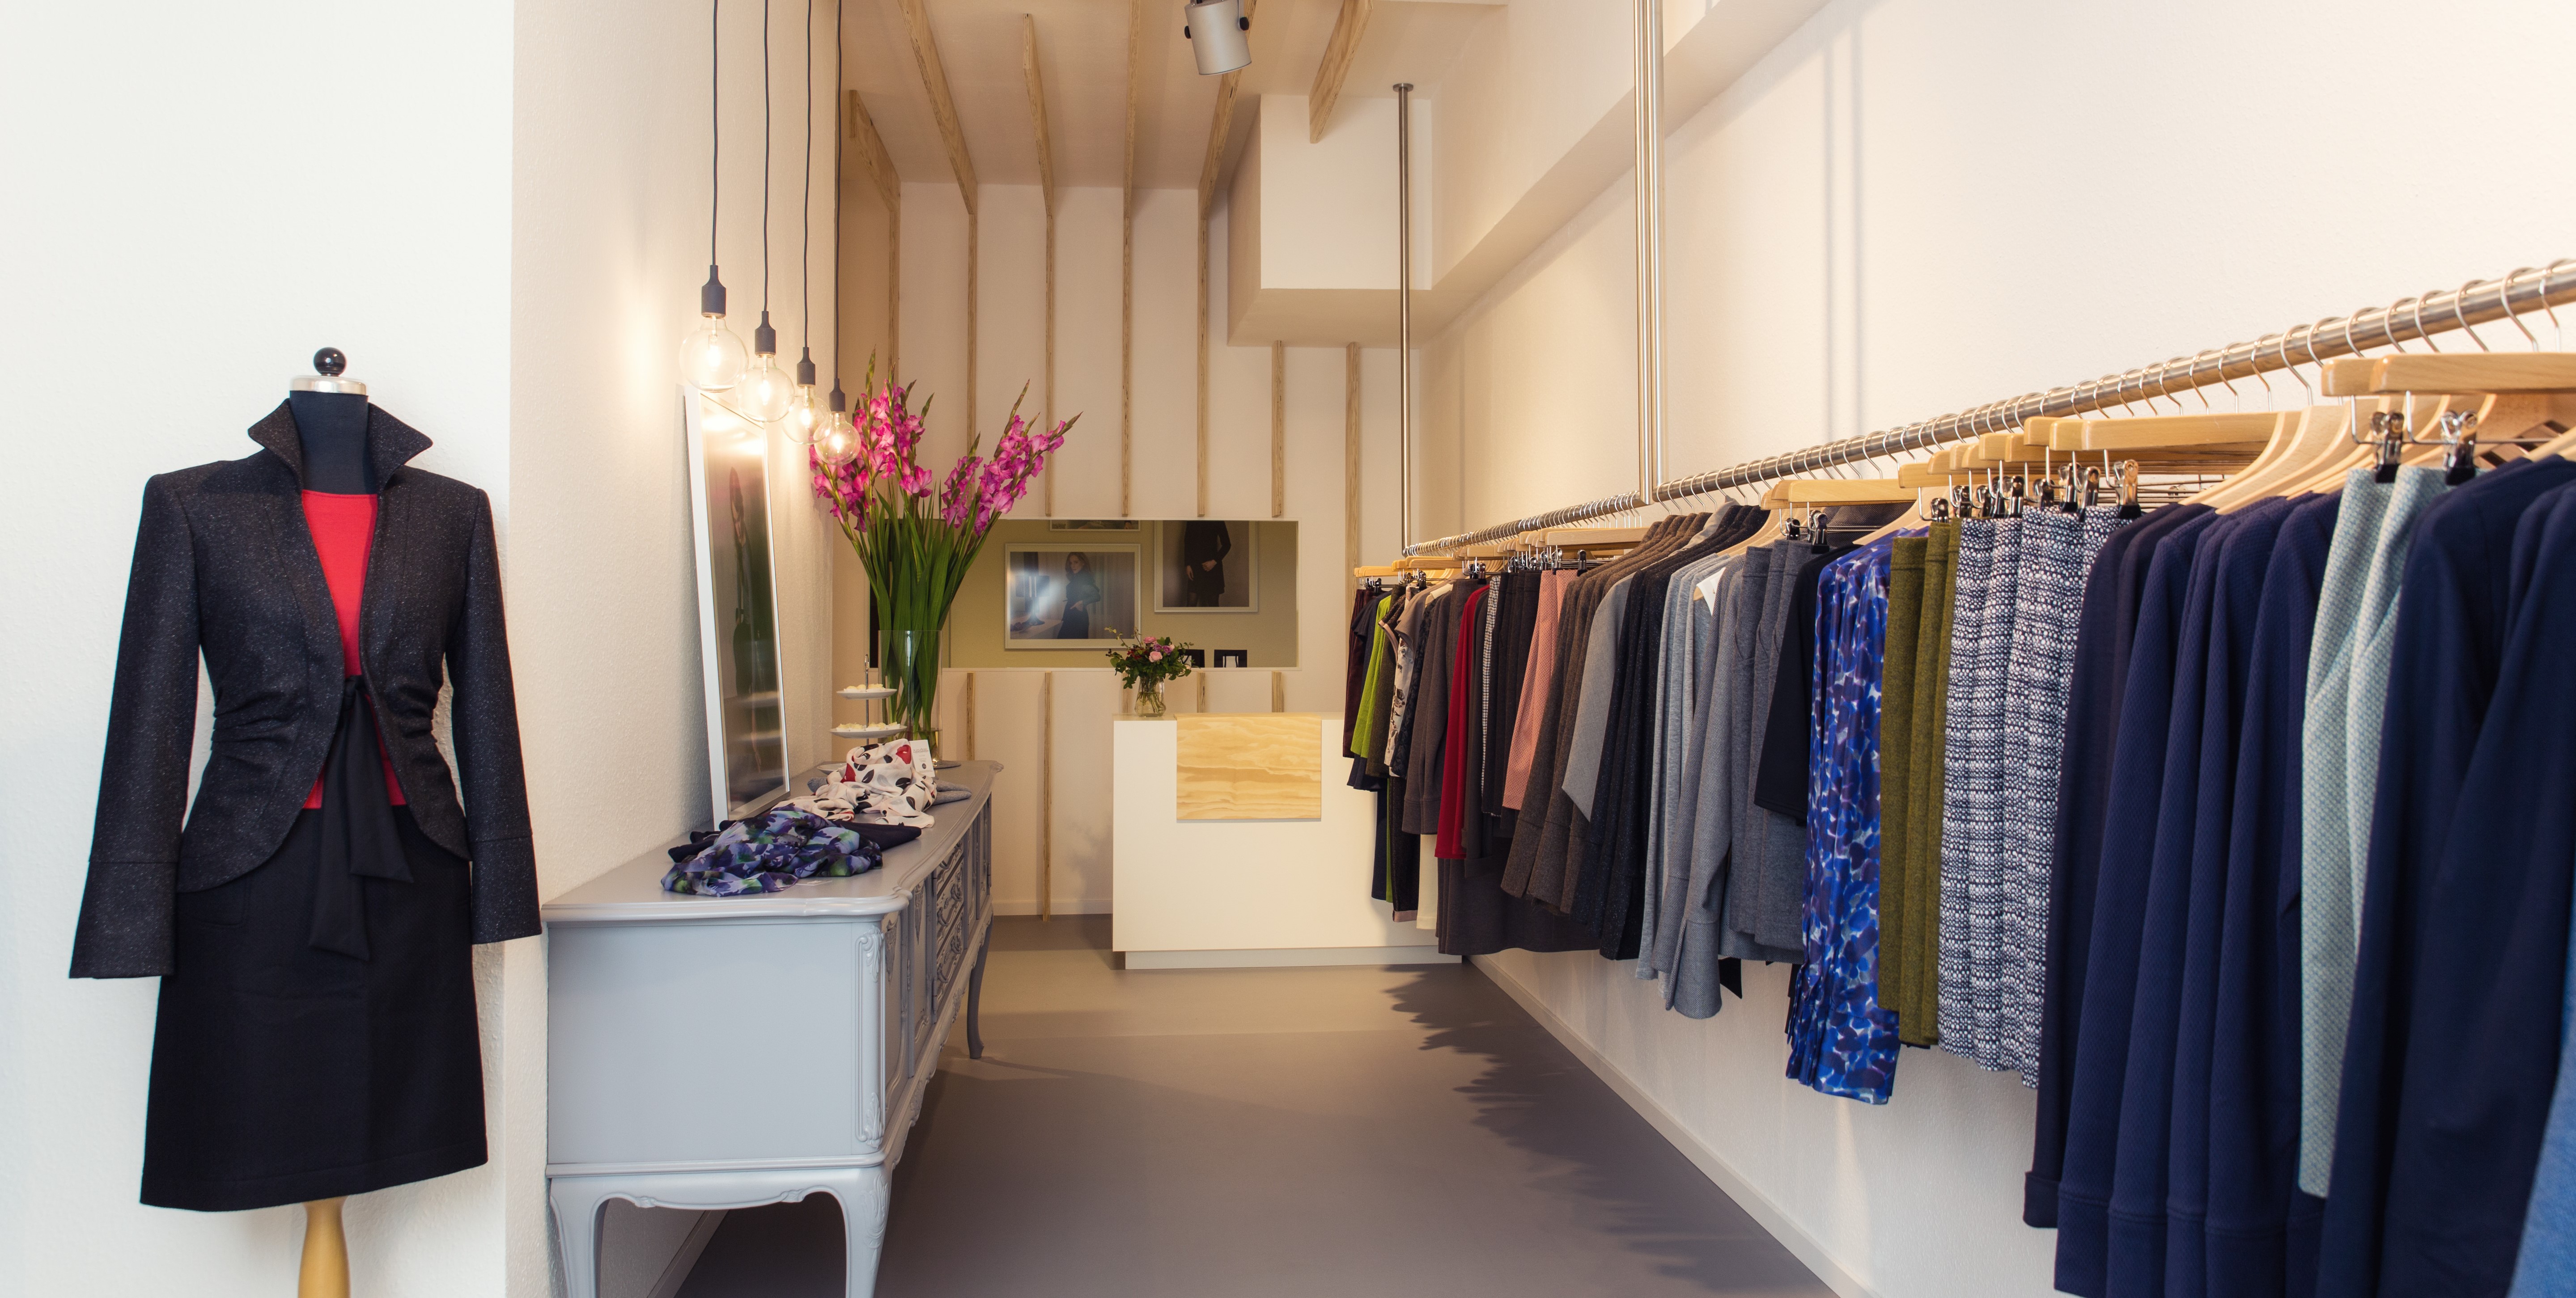 Zugvoegel Mode Concept Store